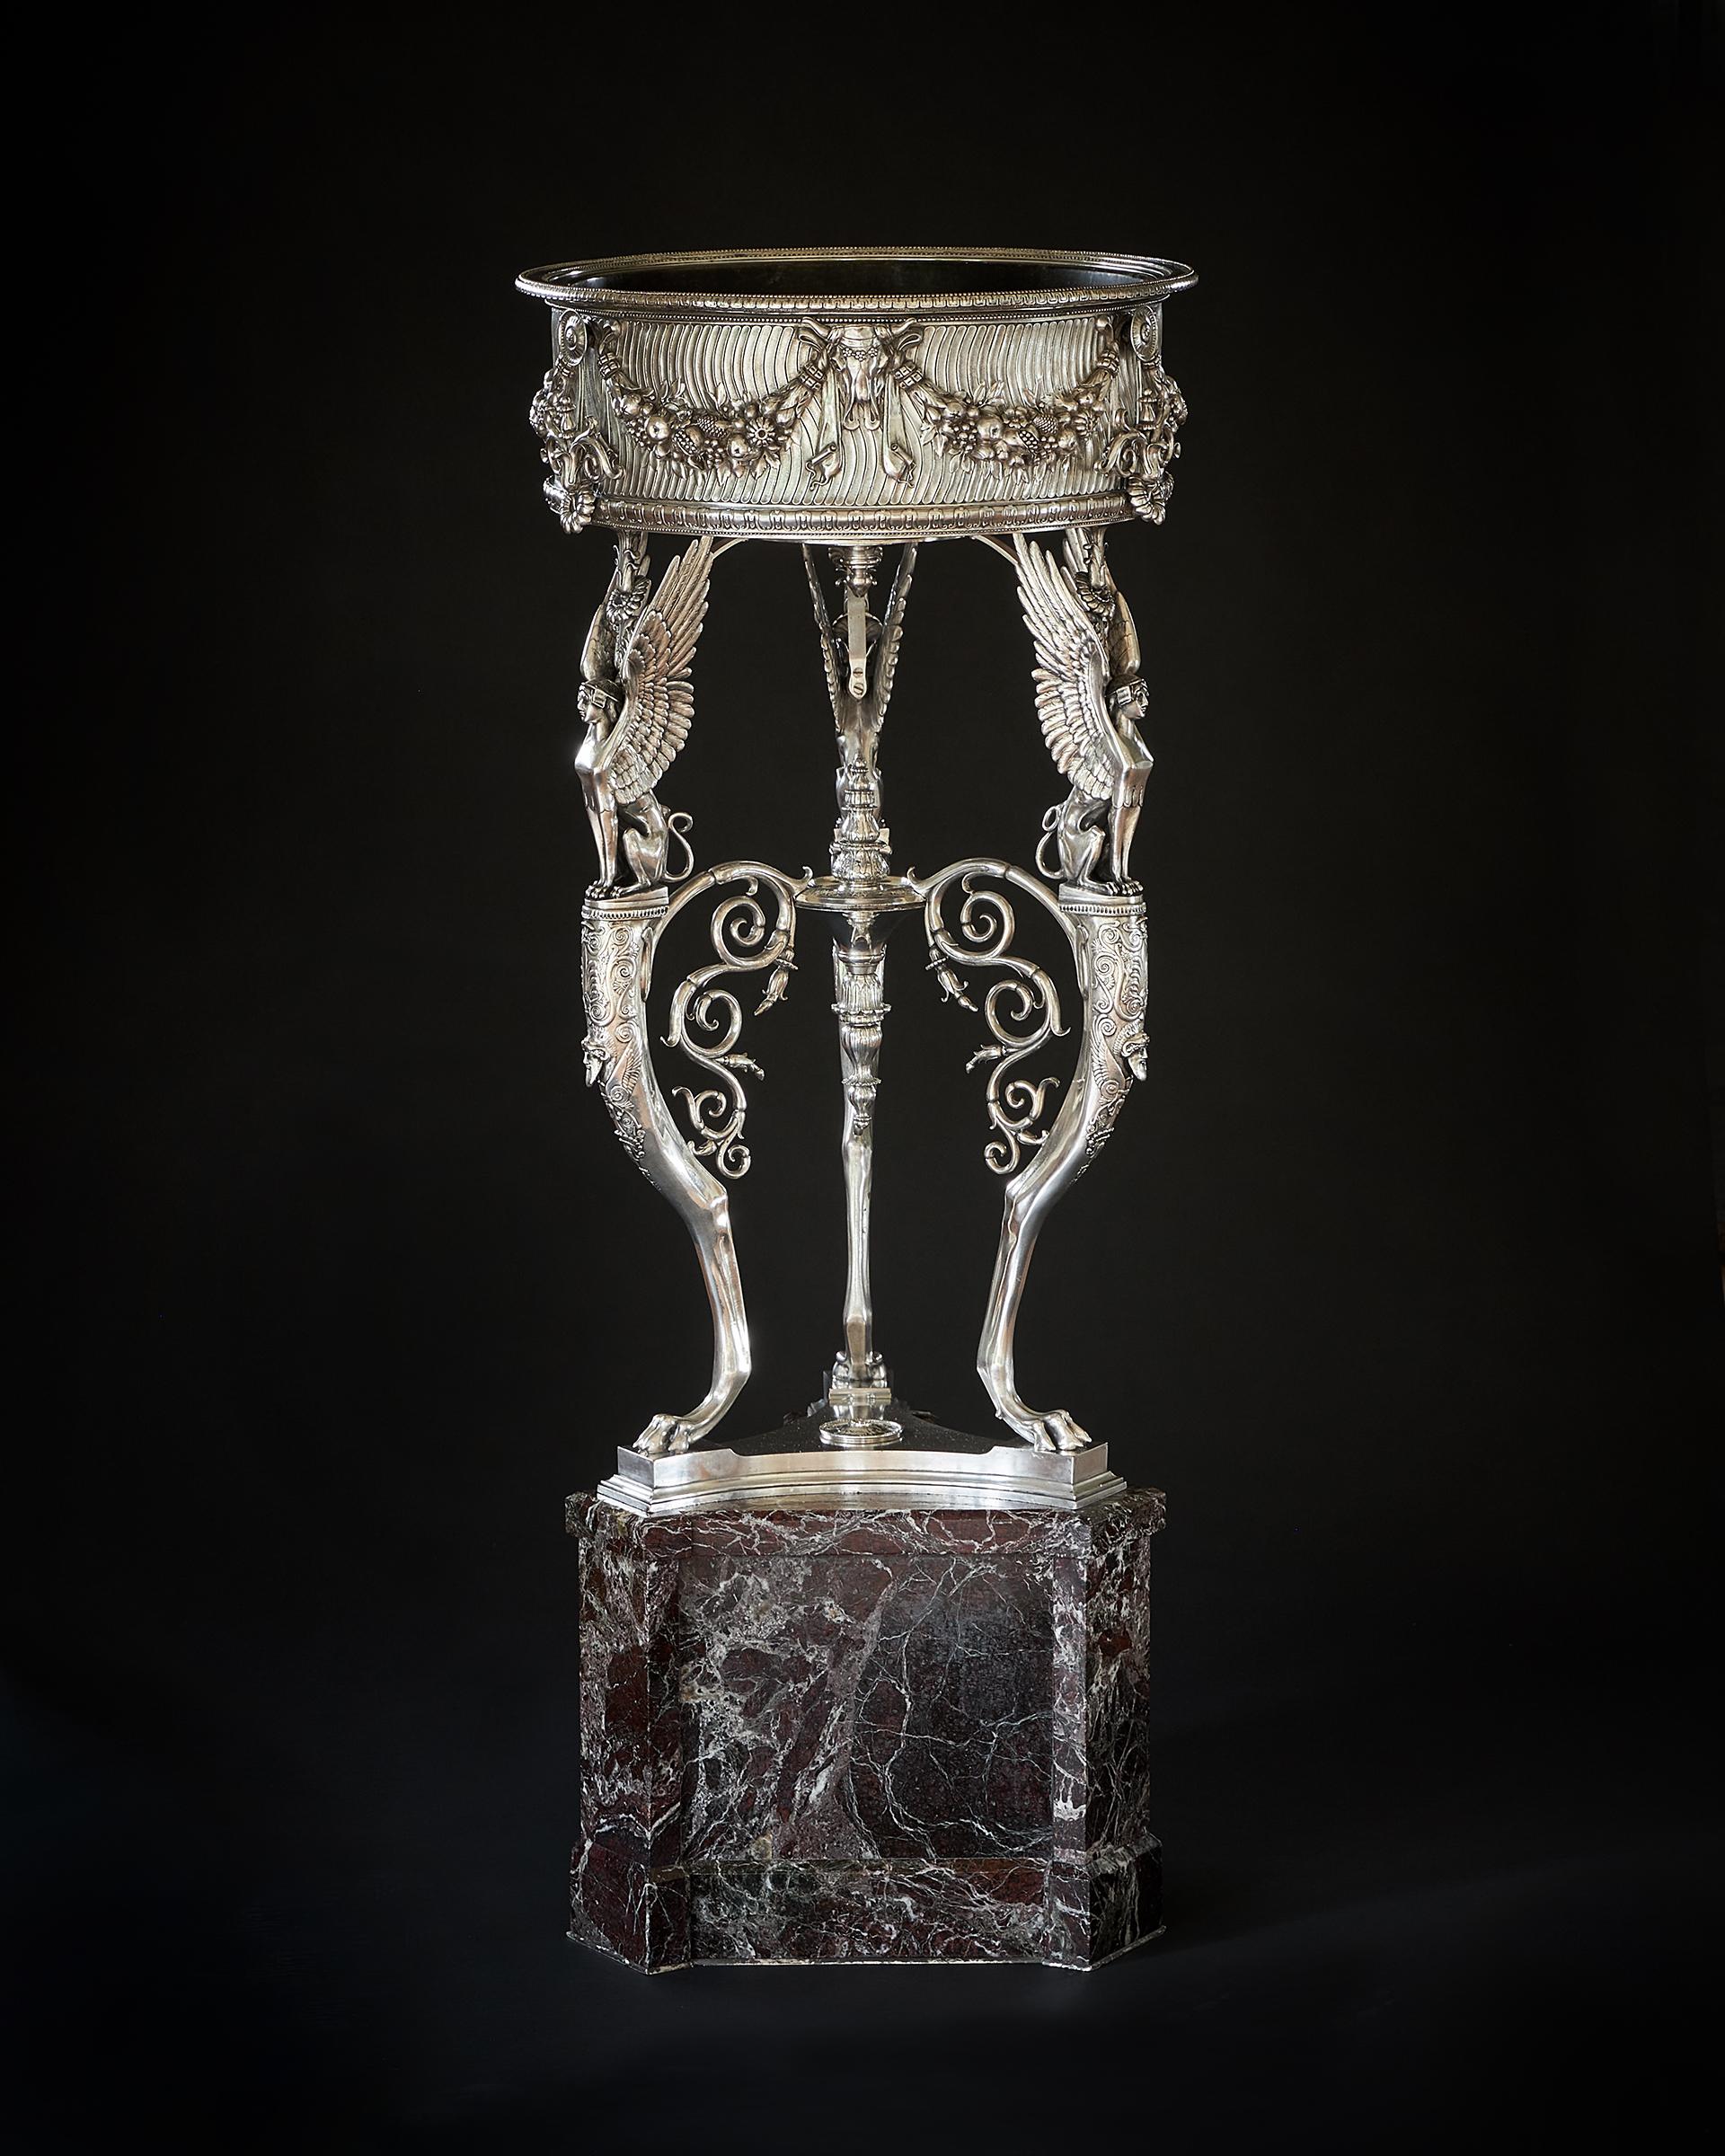 A French silvered-bronze athénienne by Ferdinand Barbedienne, Paris, last quarter 19th century with a revolving liner, the frieze applied with bucrania suspending ribbon-tied berried laurel swags above a border of bellflowers on a stippled ground